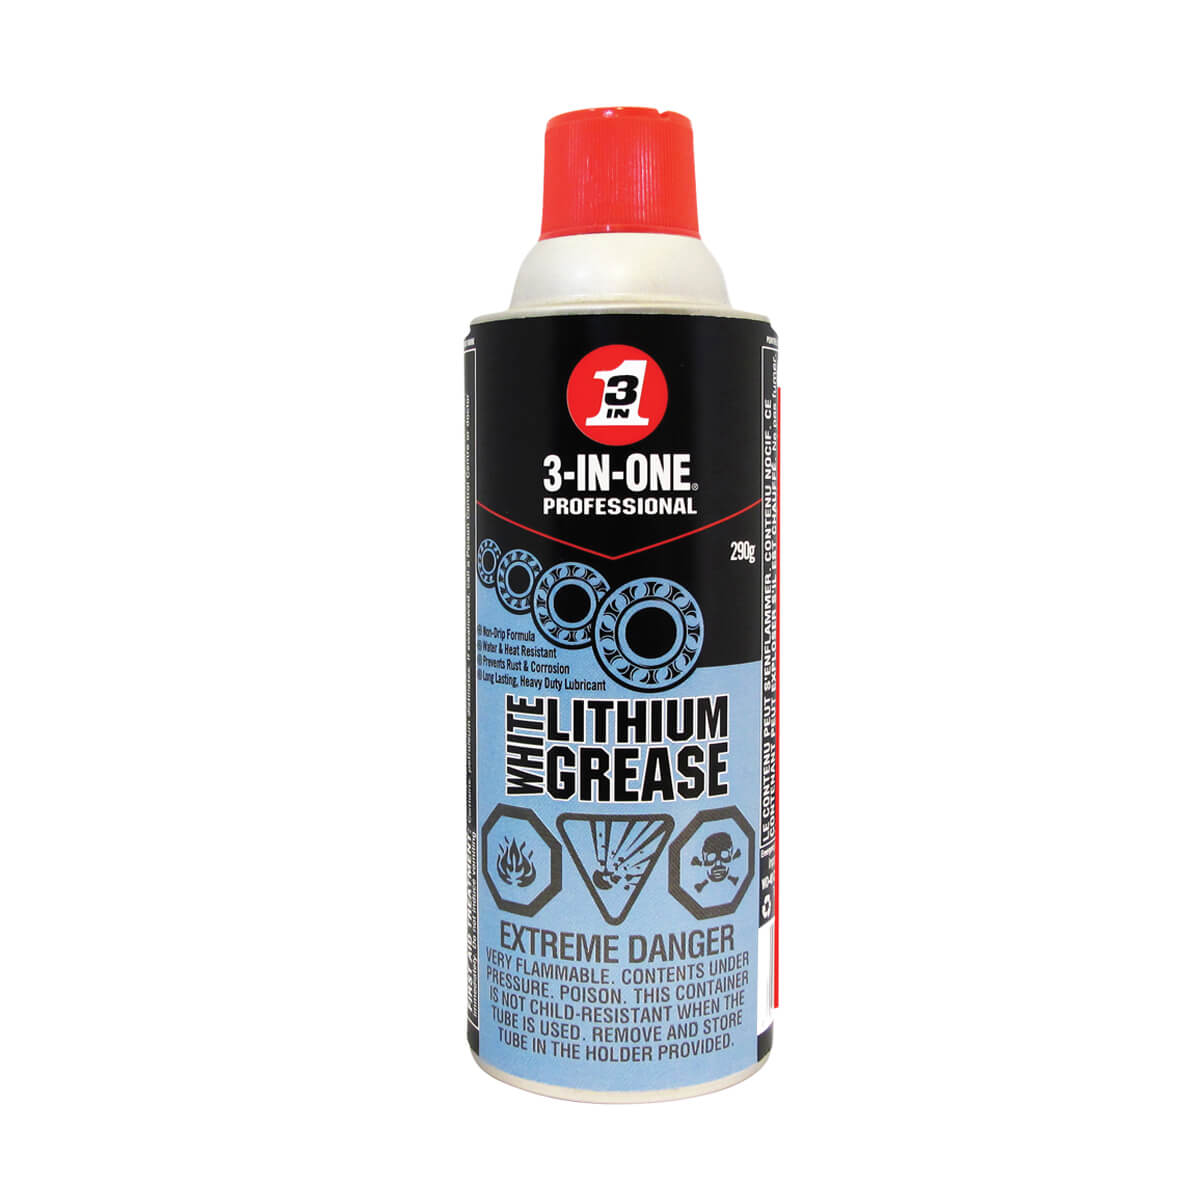 3-IN-1 Professional White Lithium Grease - 290 g